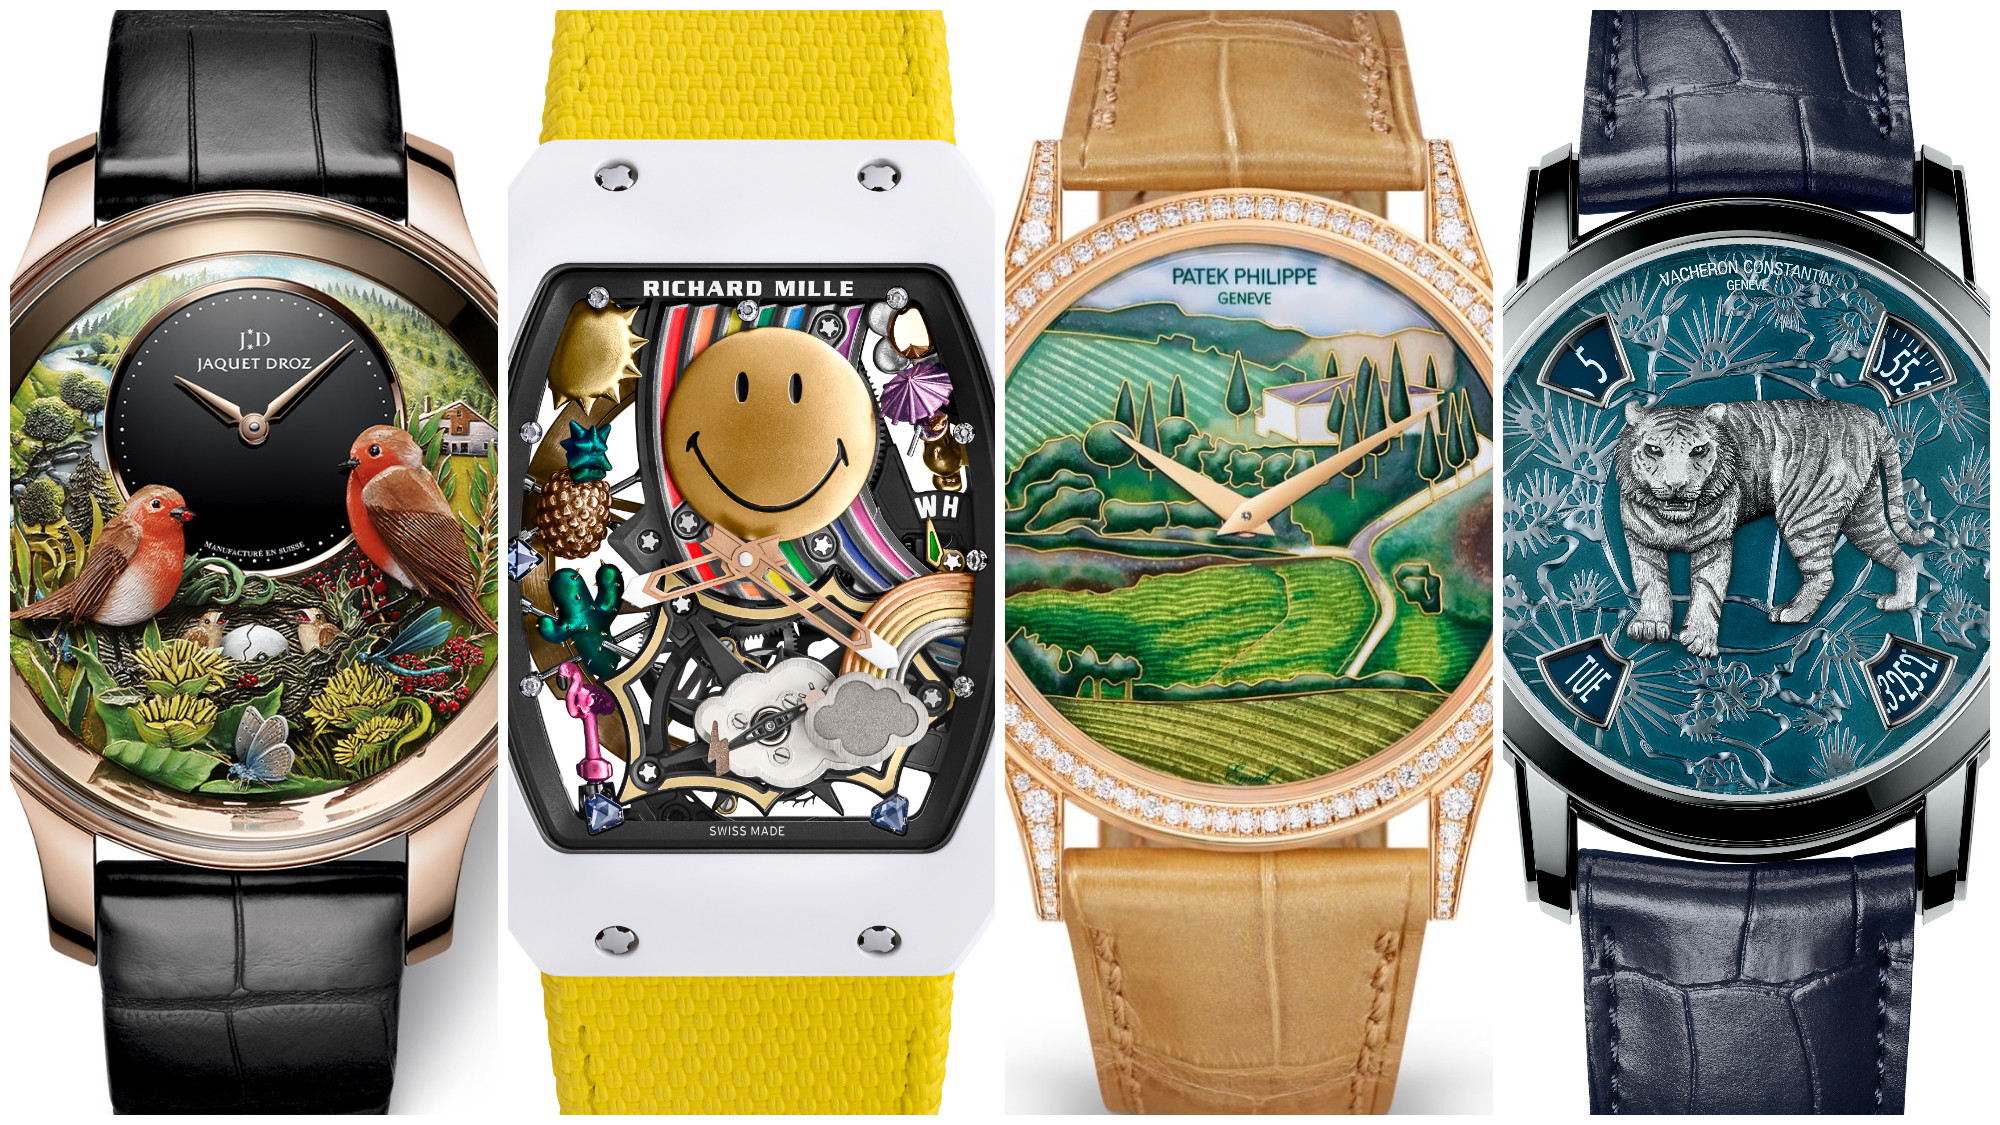 SCMP STYLE’s pick of some of the best art-inspired watches of 2022, (L-R): Jaquet-Droz Bird Repeater, Richard Mille RM 88 Automatic Winding Tourbillon Smiley, Patek Philippe Calatrava 5077R Italian Scenes / Tuscany, Vacheron Constantin Legend of the Chinese Zodiac: Year of the Tiger
